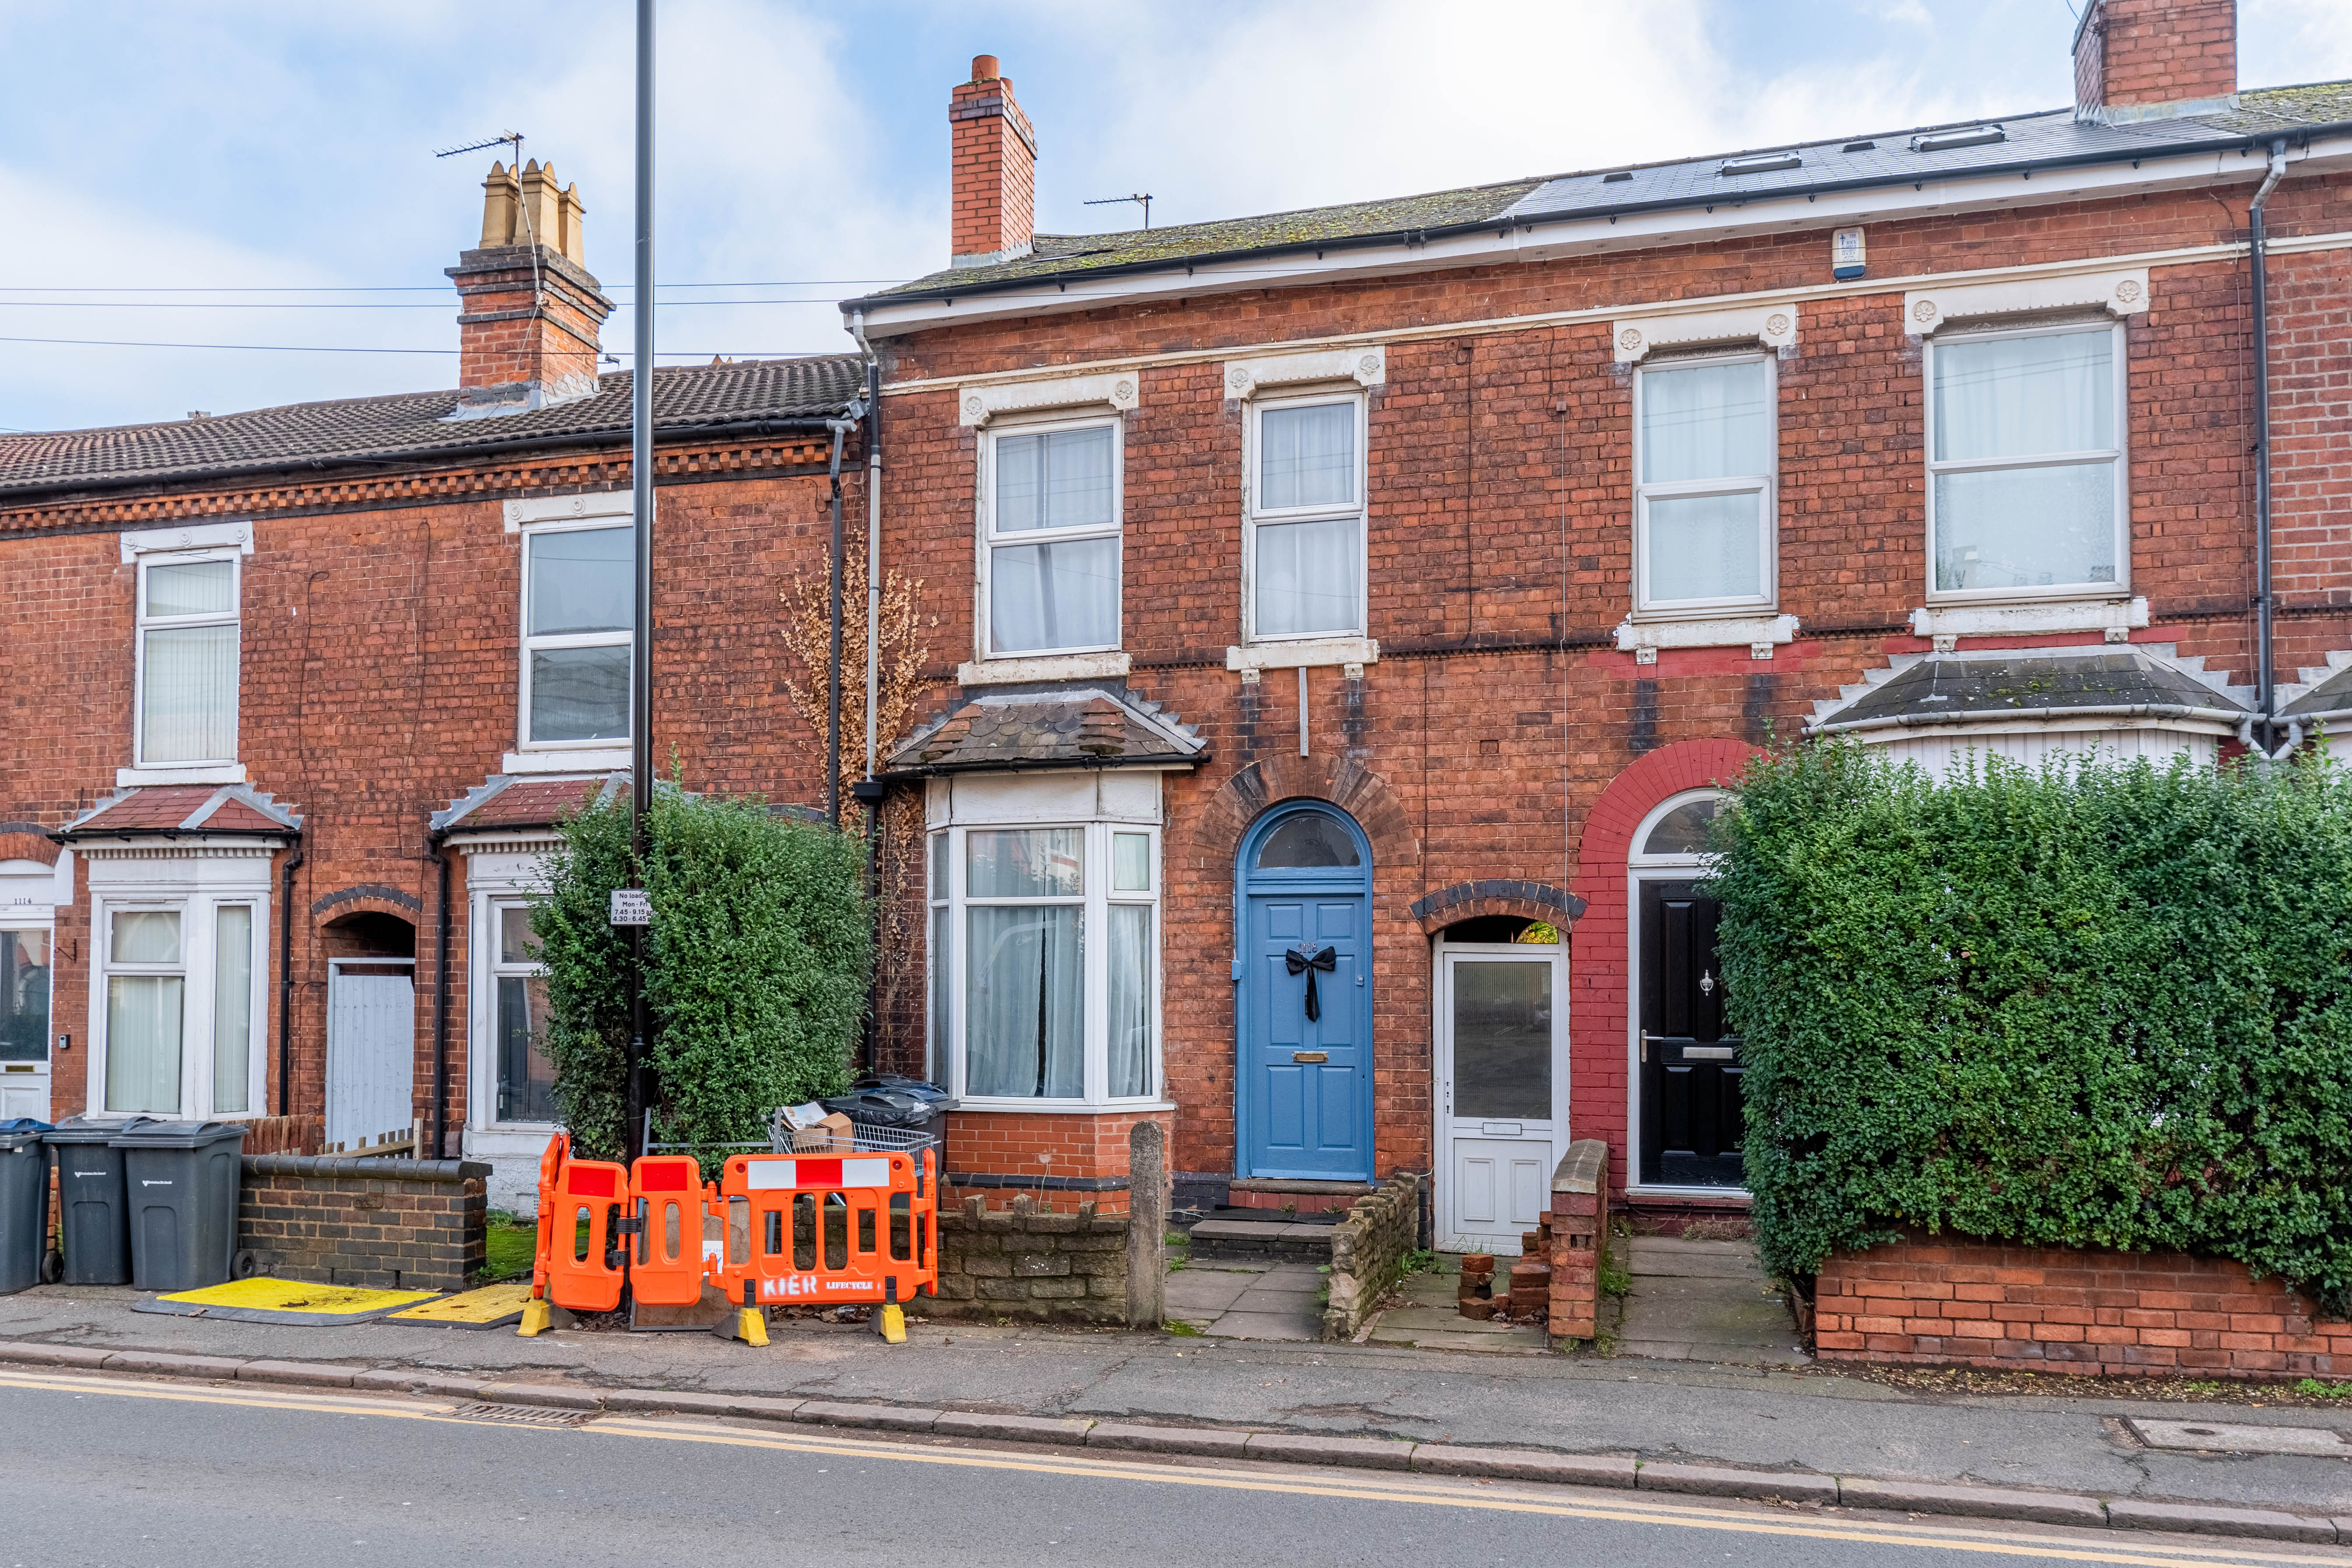 3 bed house for sale in Pershore Road, Stirchley - Property Image 1